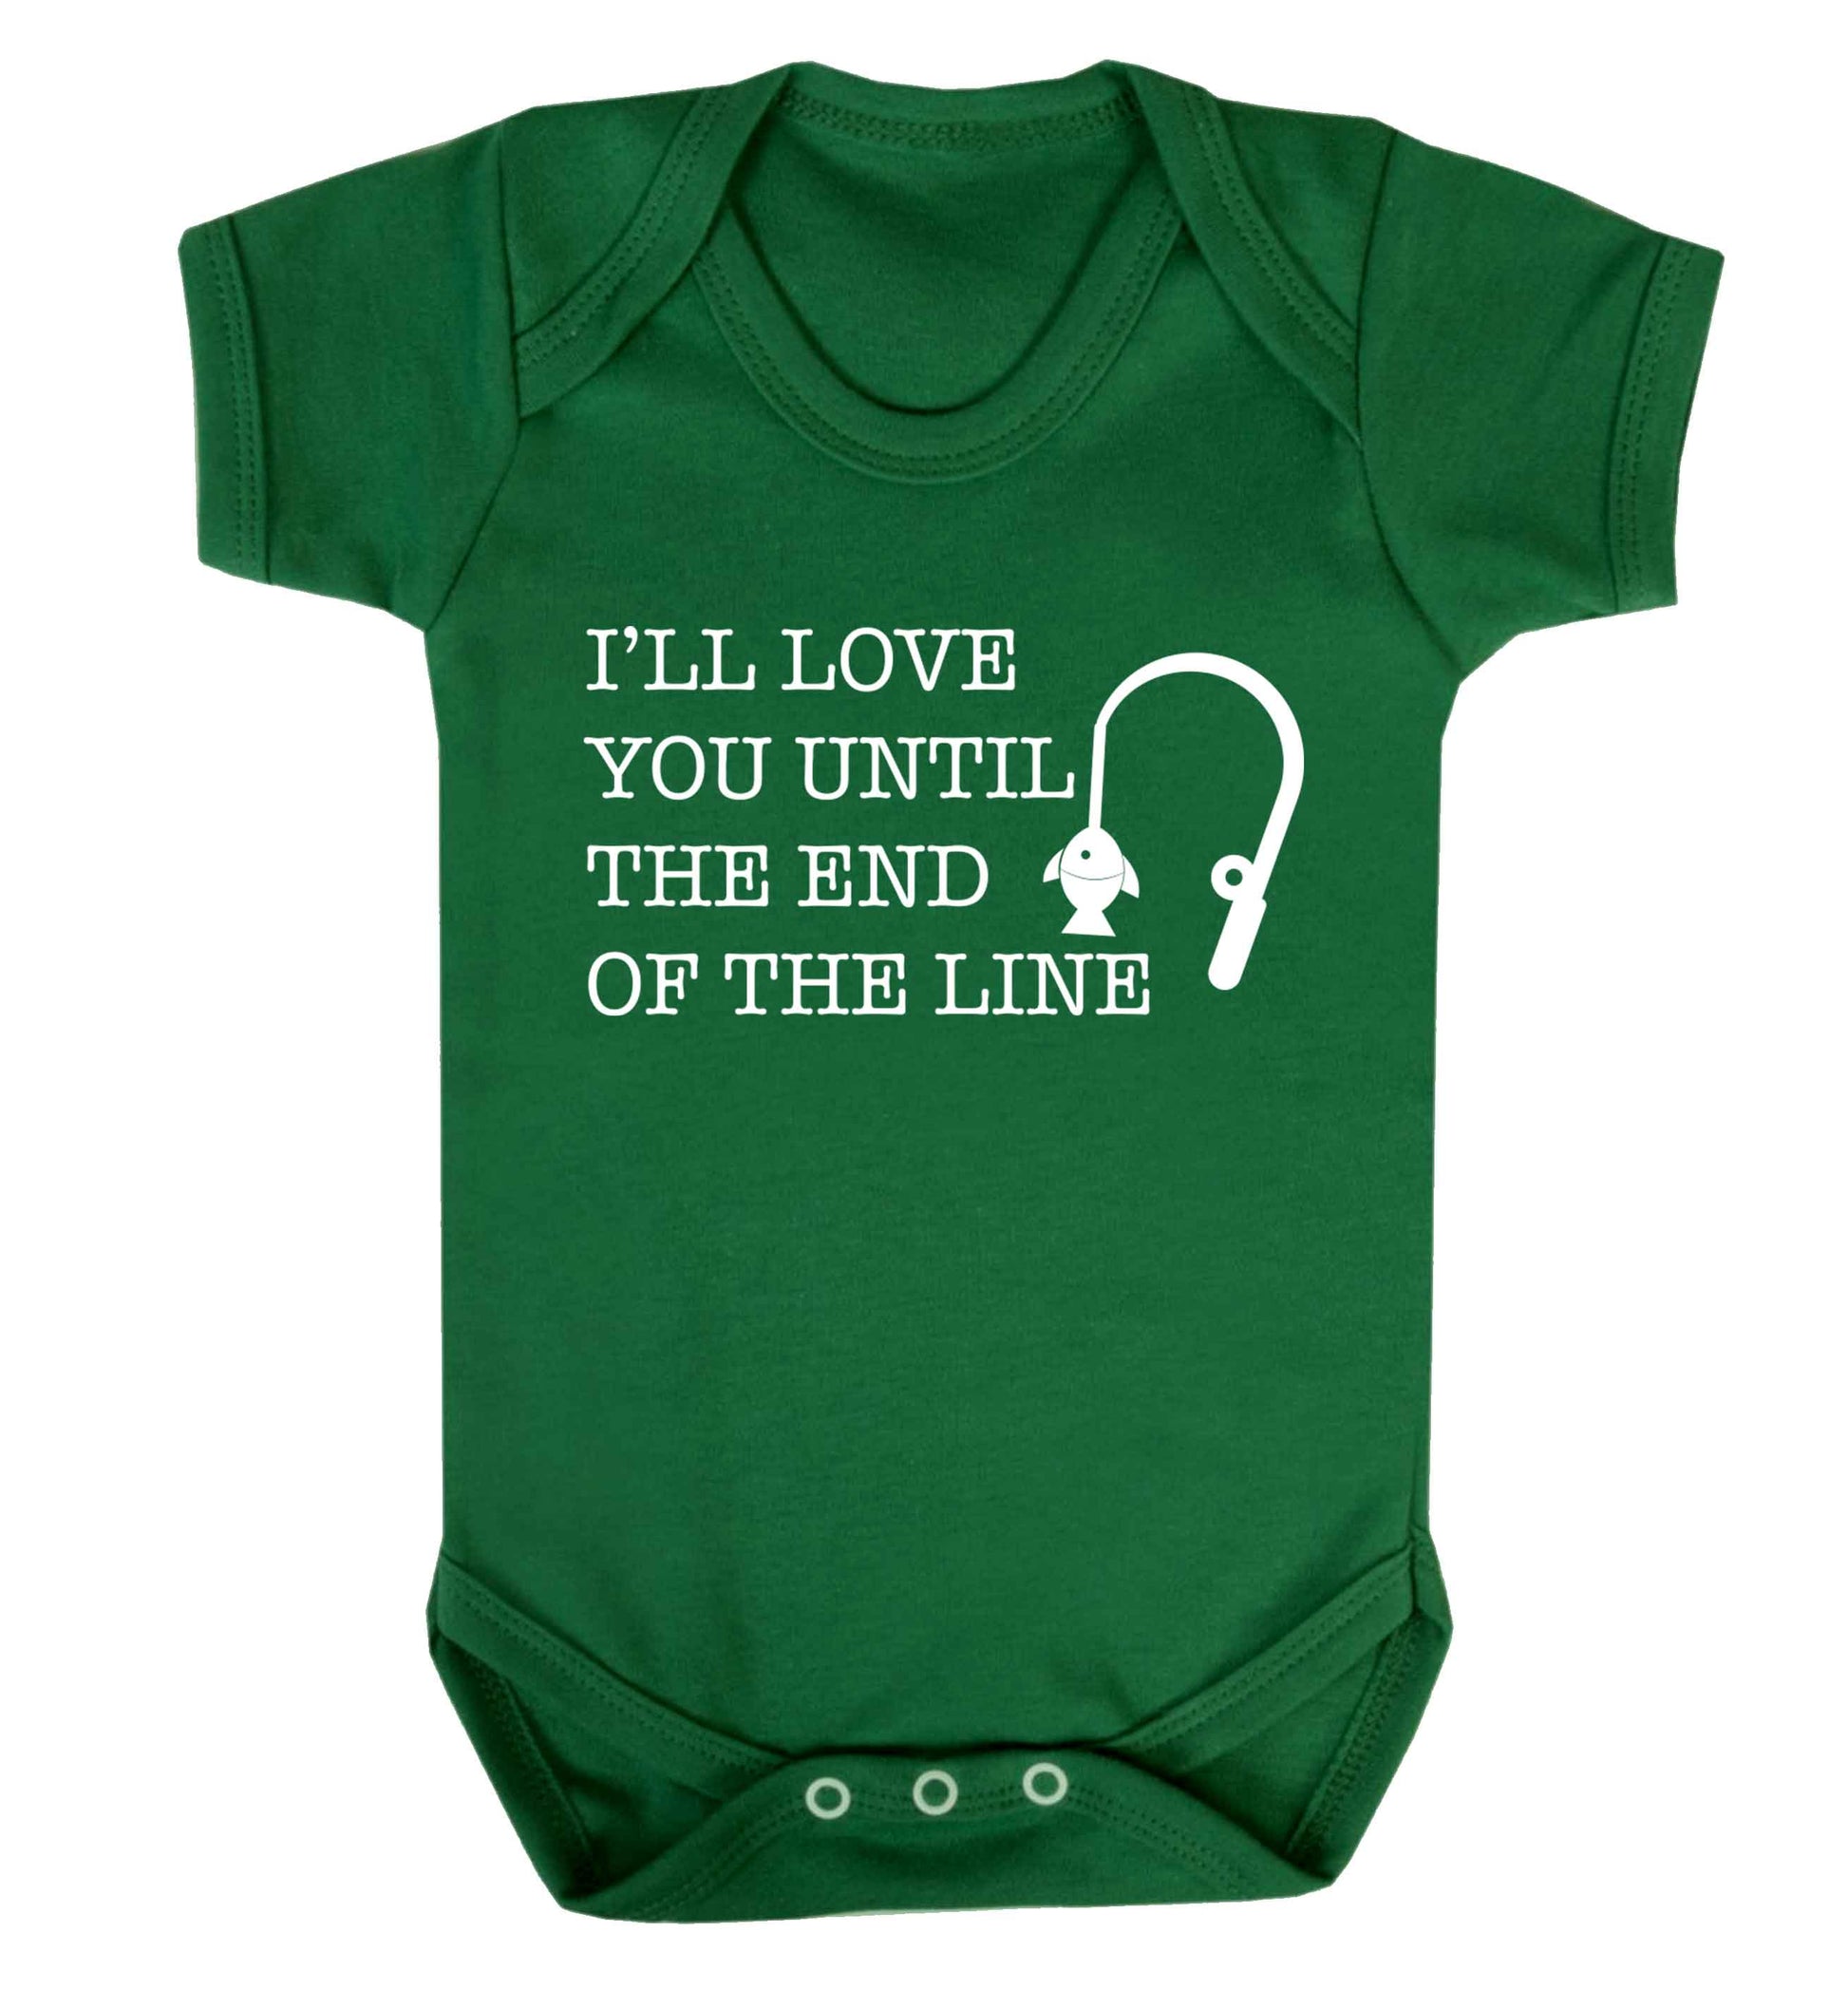 I'll love you until the end of the line Baby Vest green 18-24 months